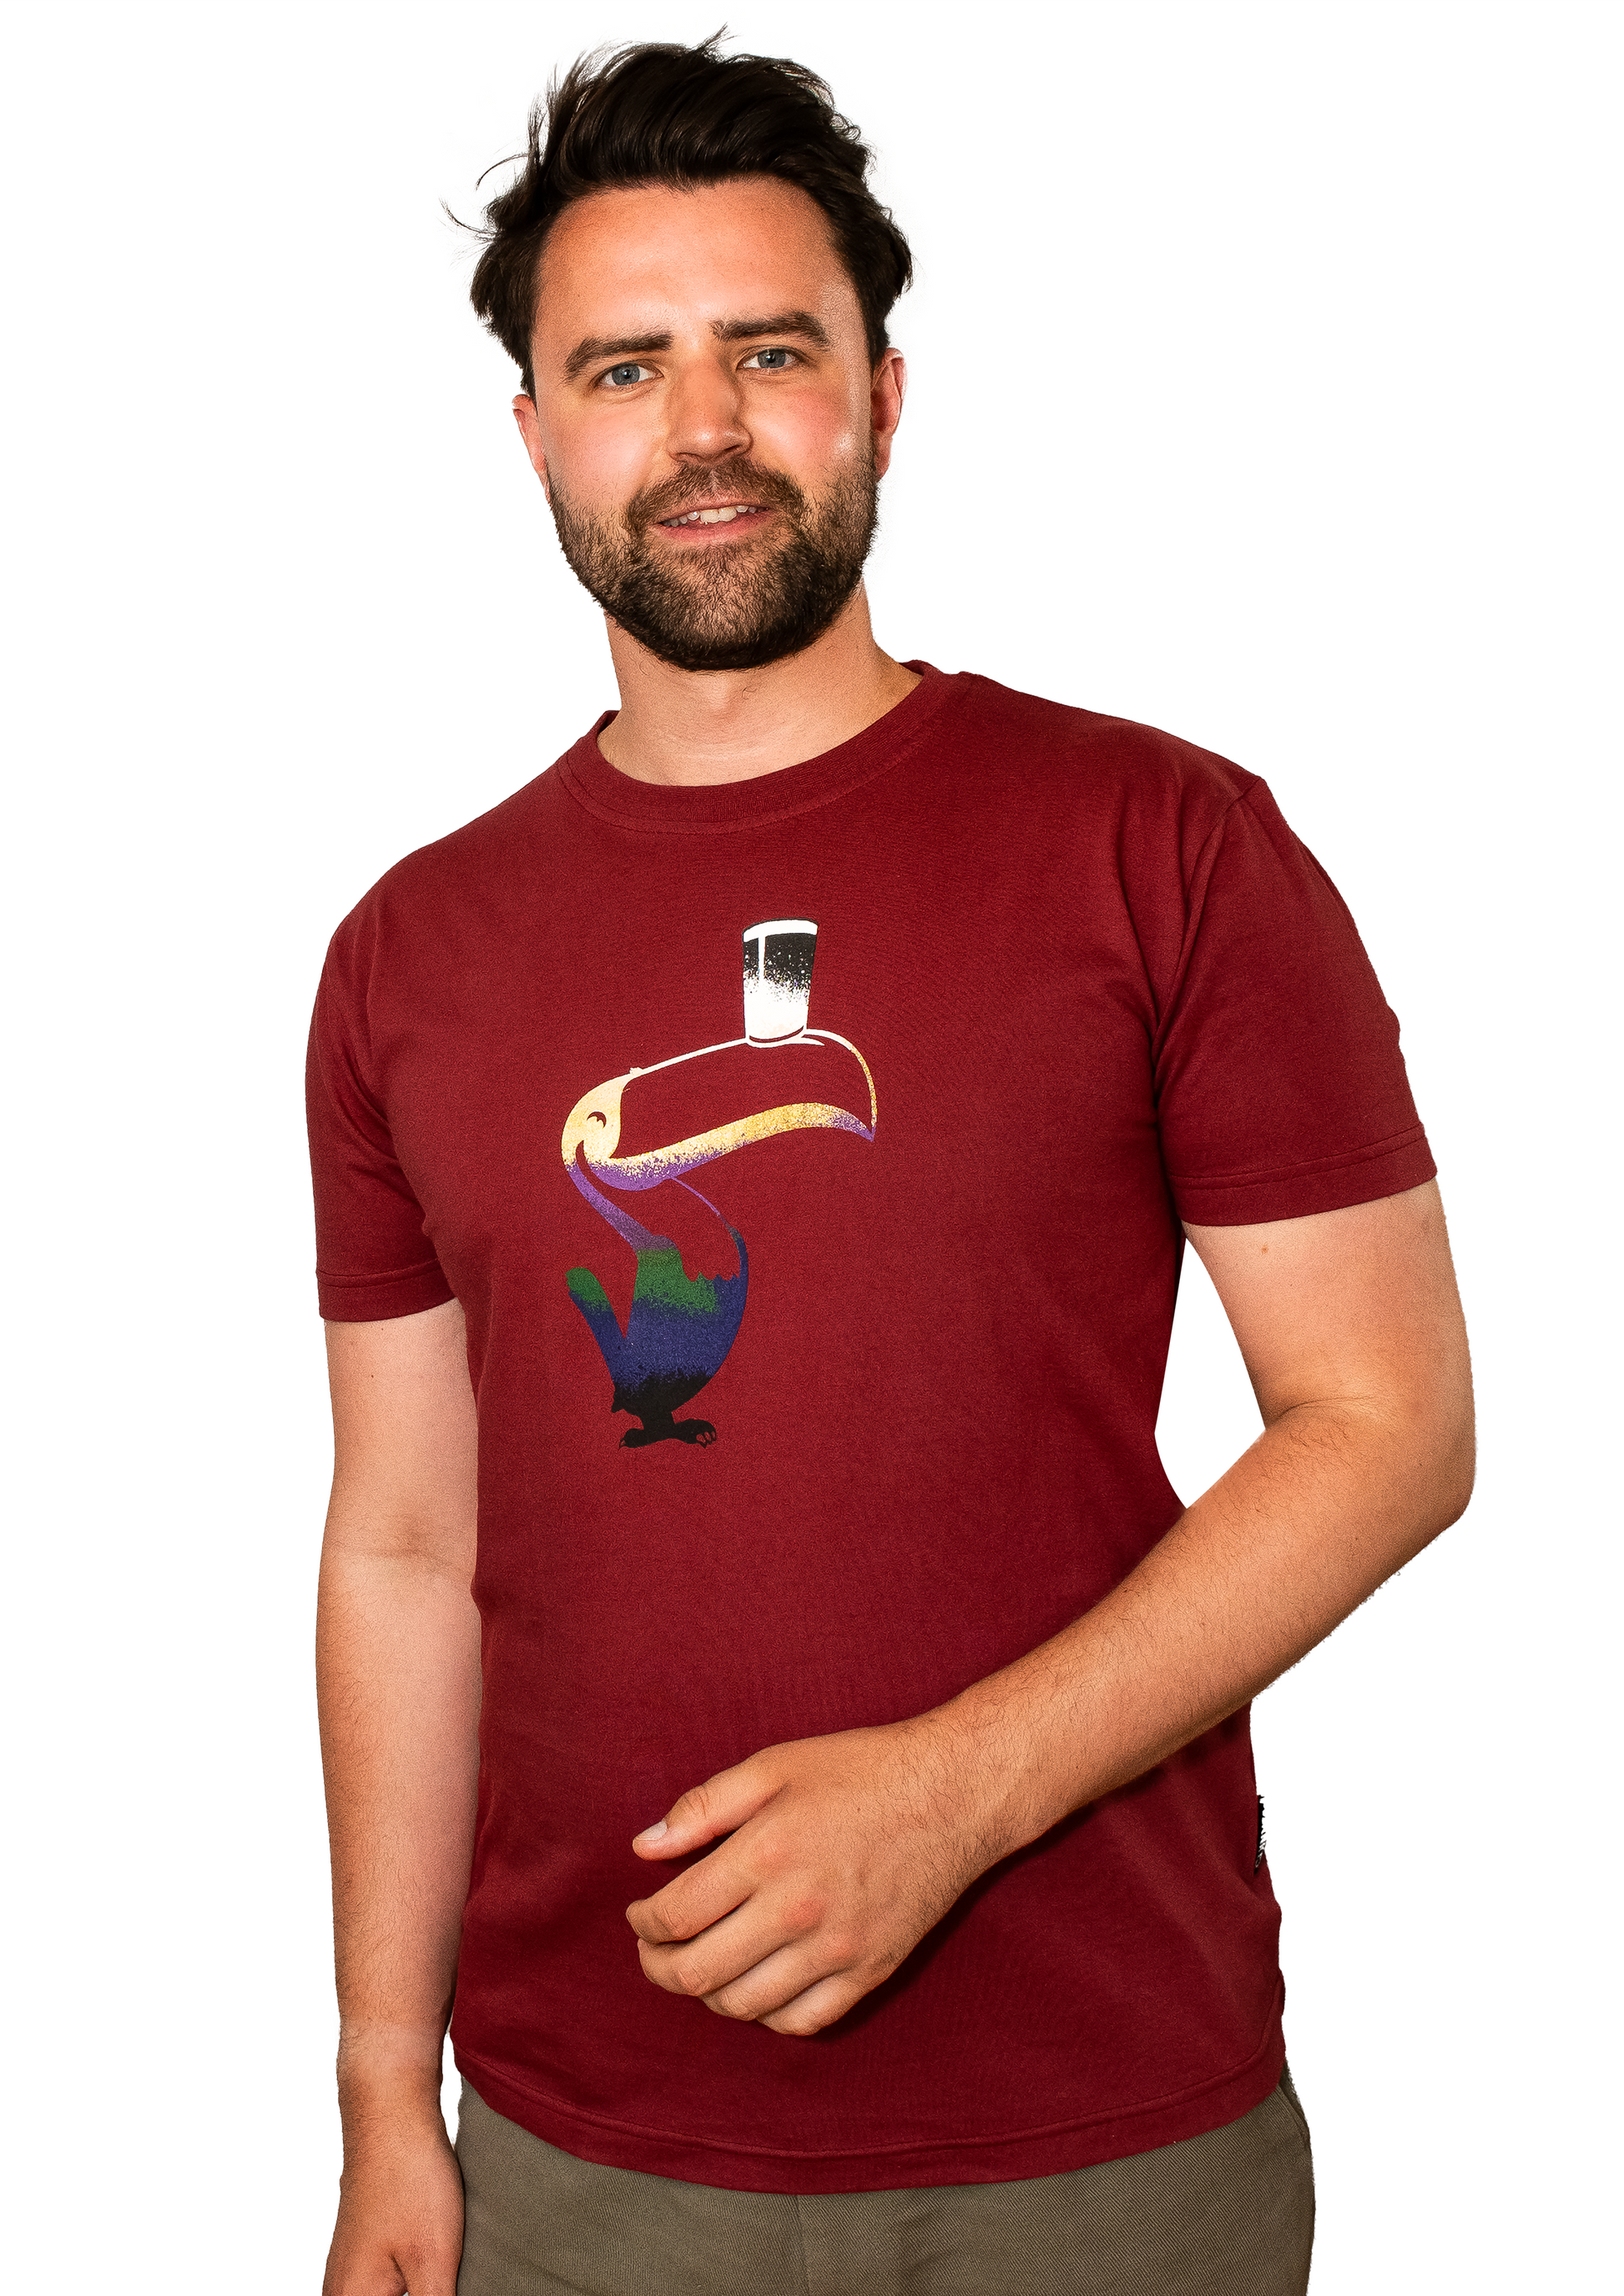 A man wearing a Guinness Liquid Toucan T-Shirt - Red with a bird on it.